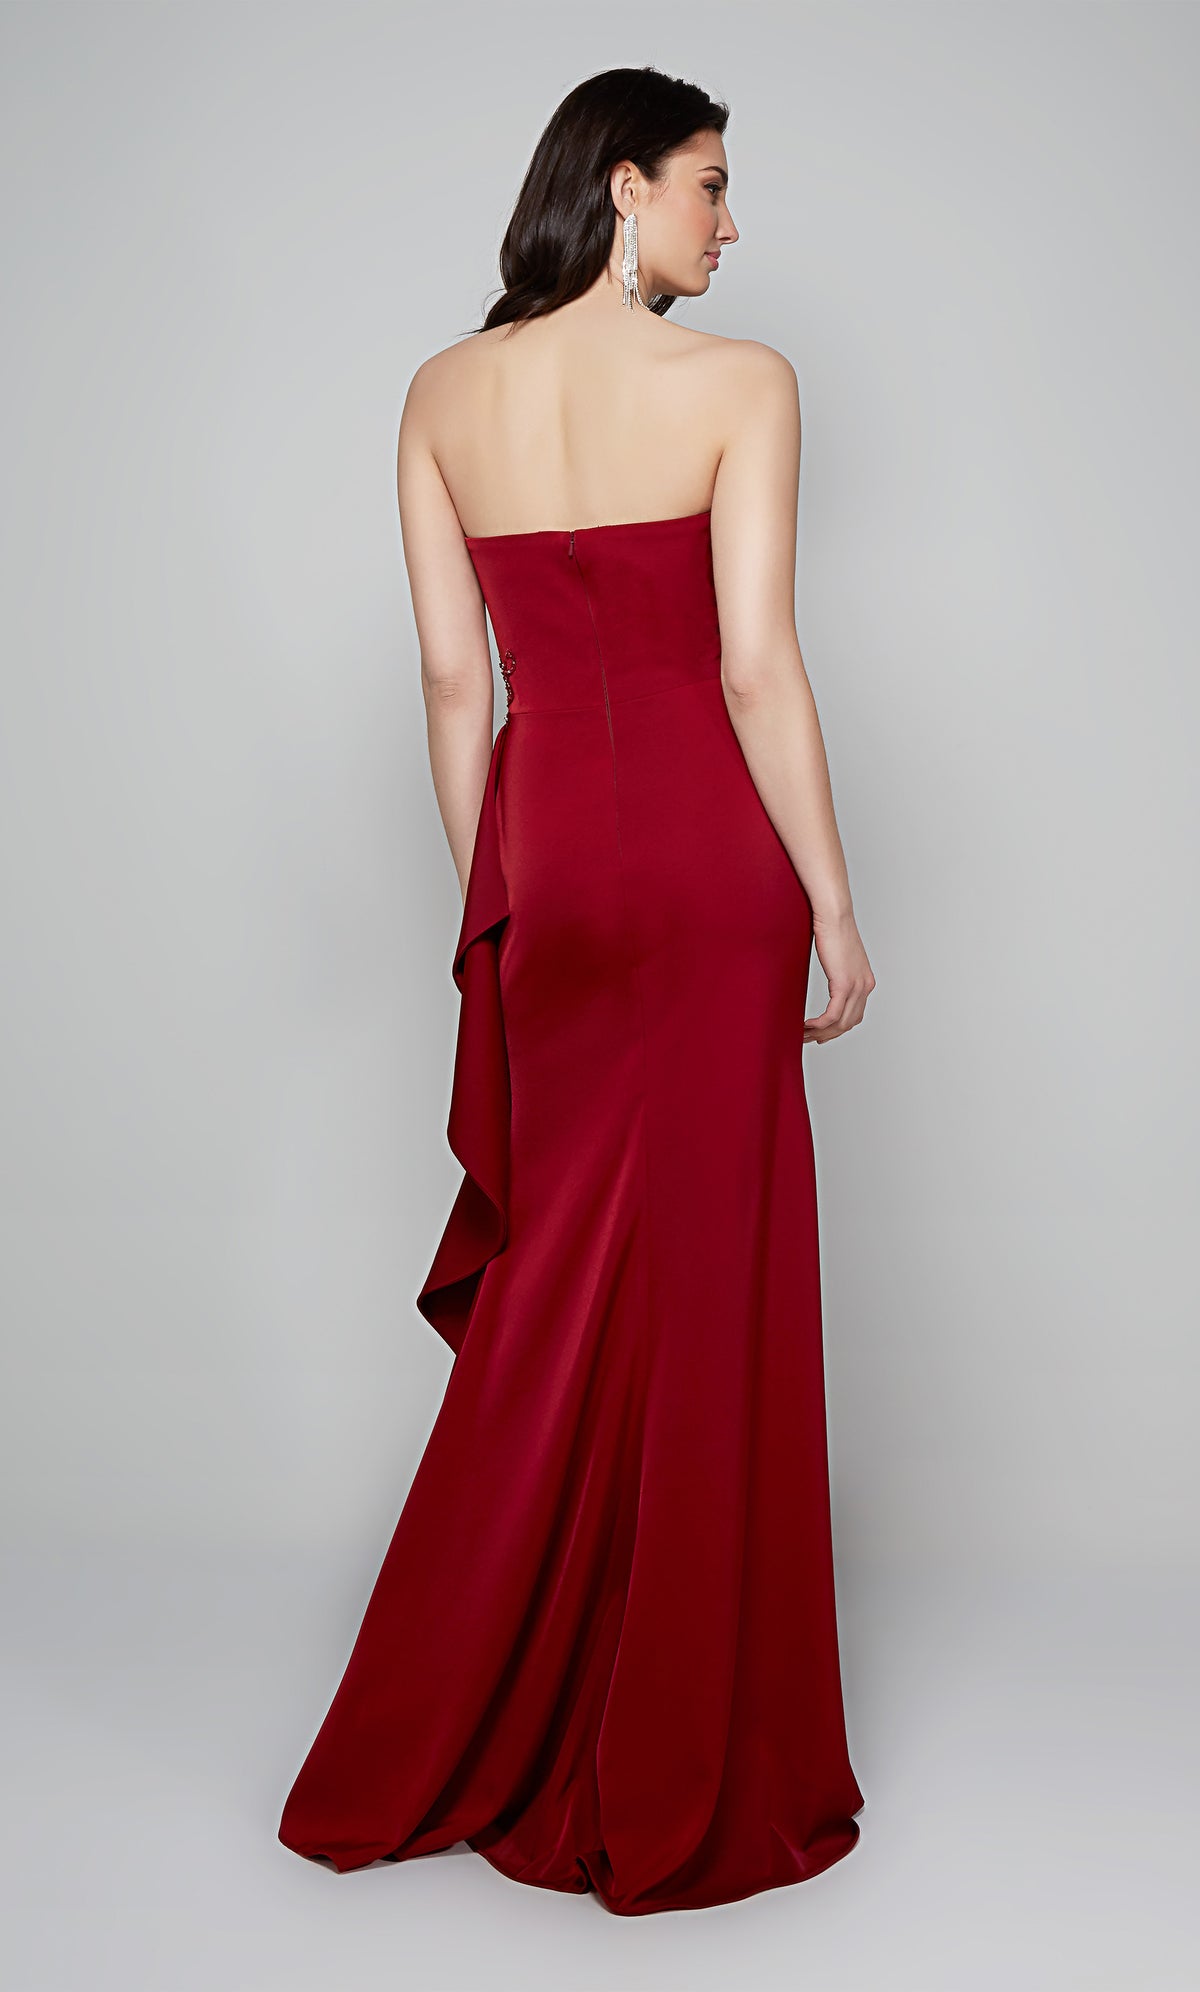 Long strapless fit and flare gown with a side ruffle and zip up back in claret.